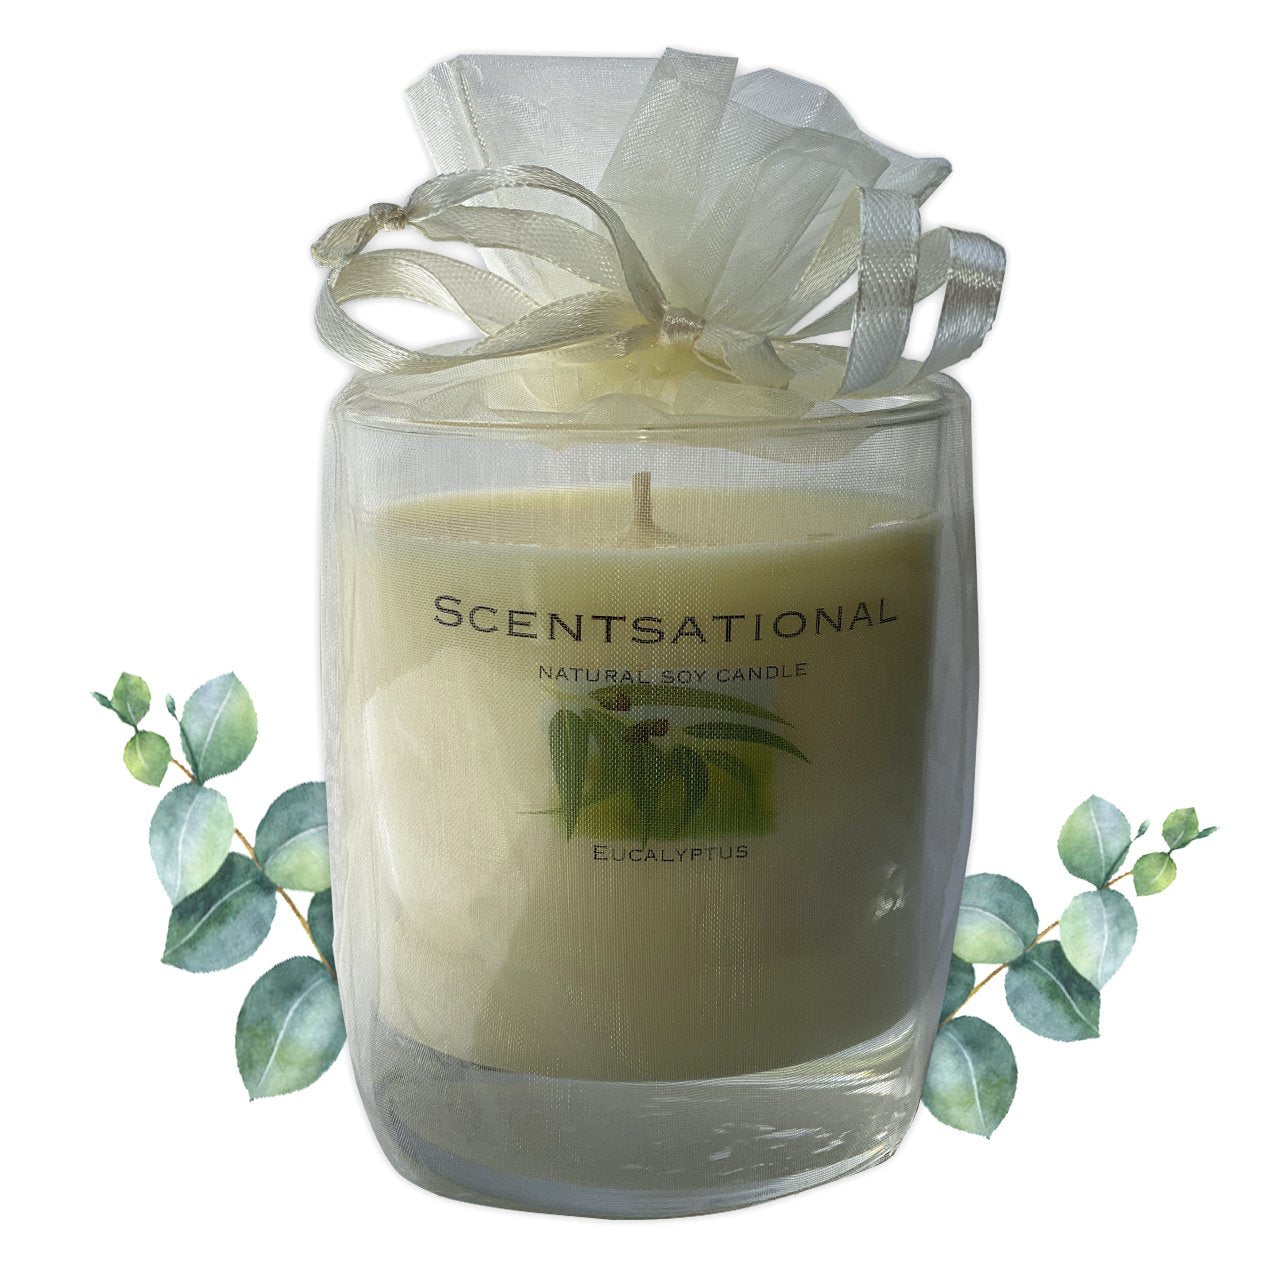 Scented Soy Candles EUCALYPTUS (11 oz) eliminates smoke, household and pet odors.